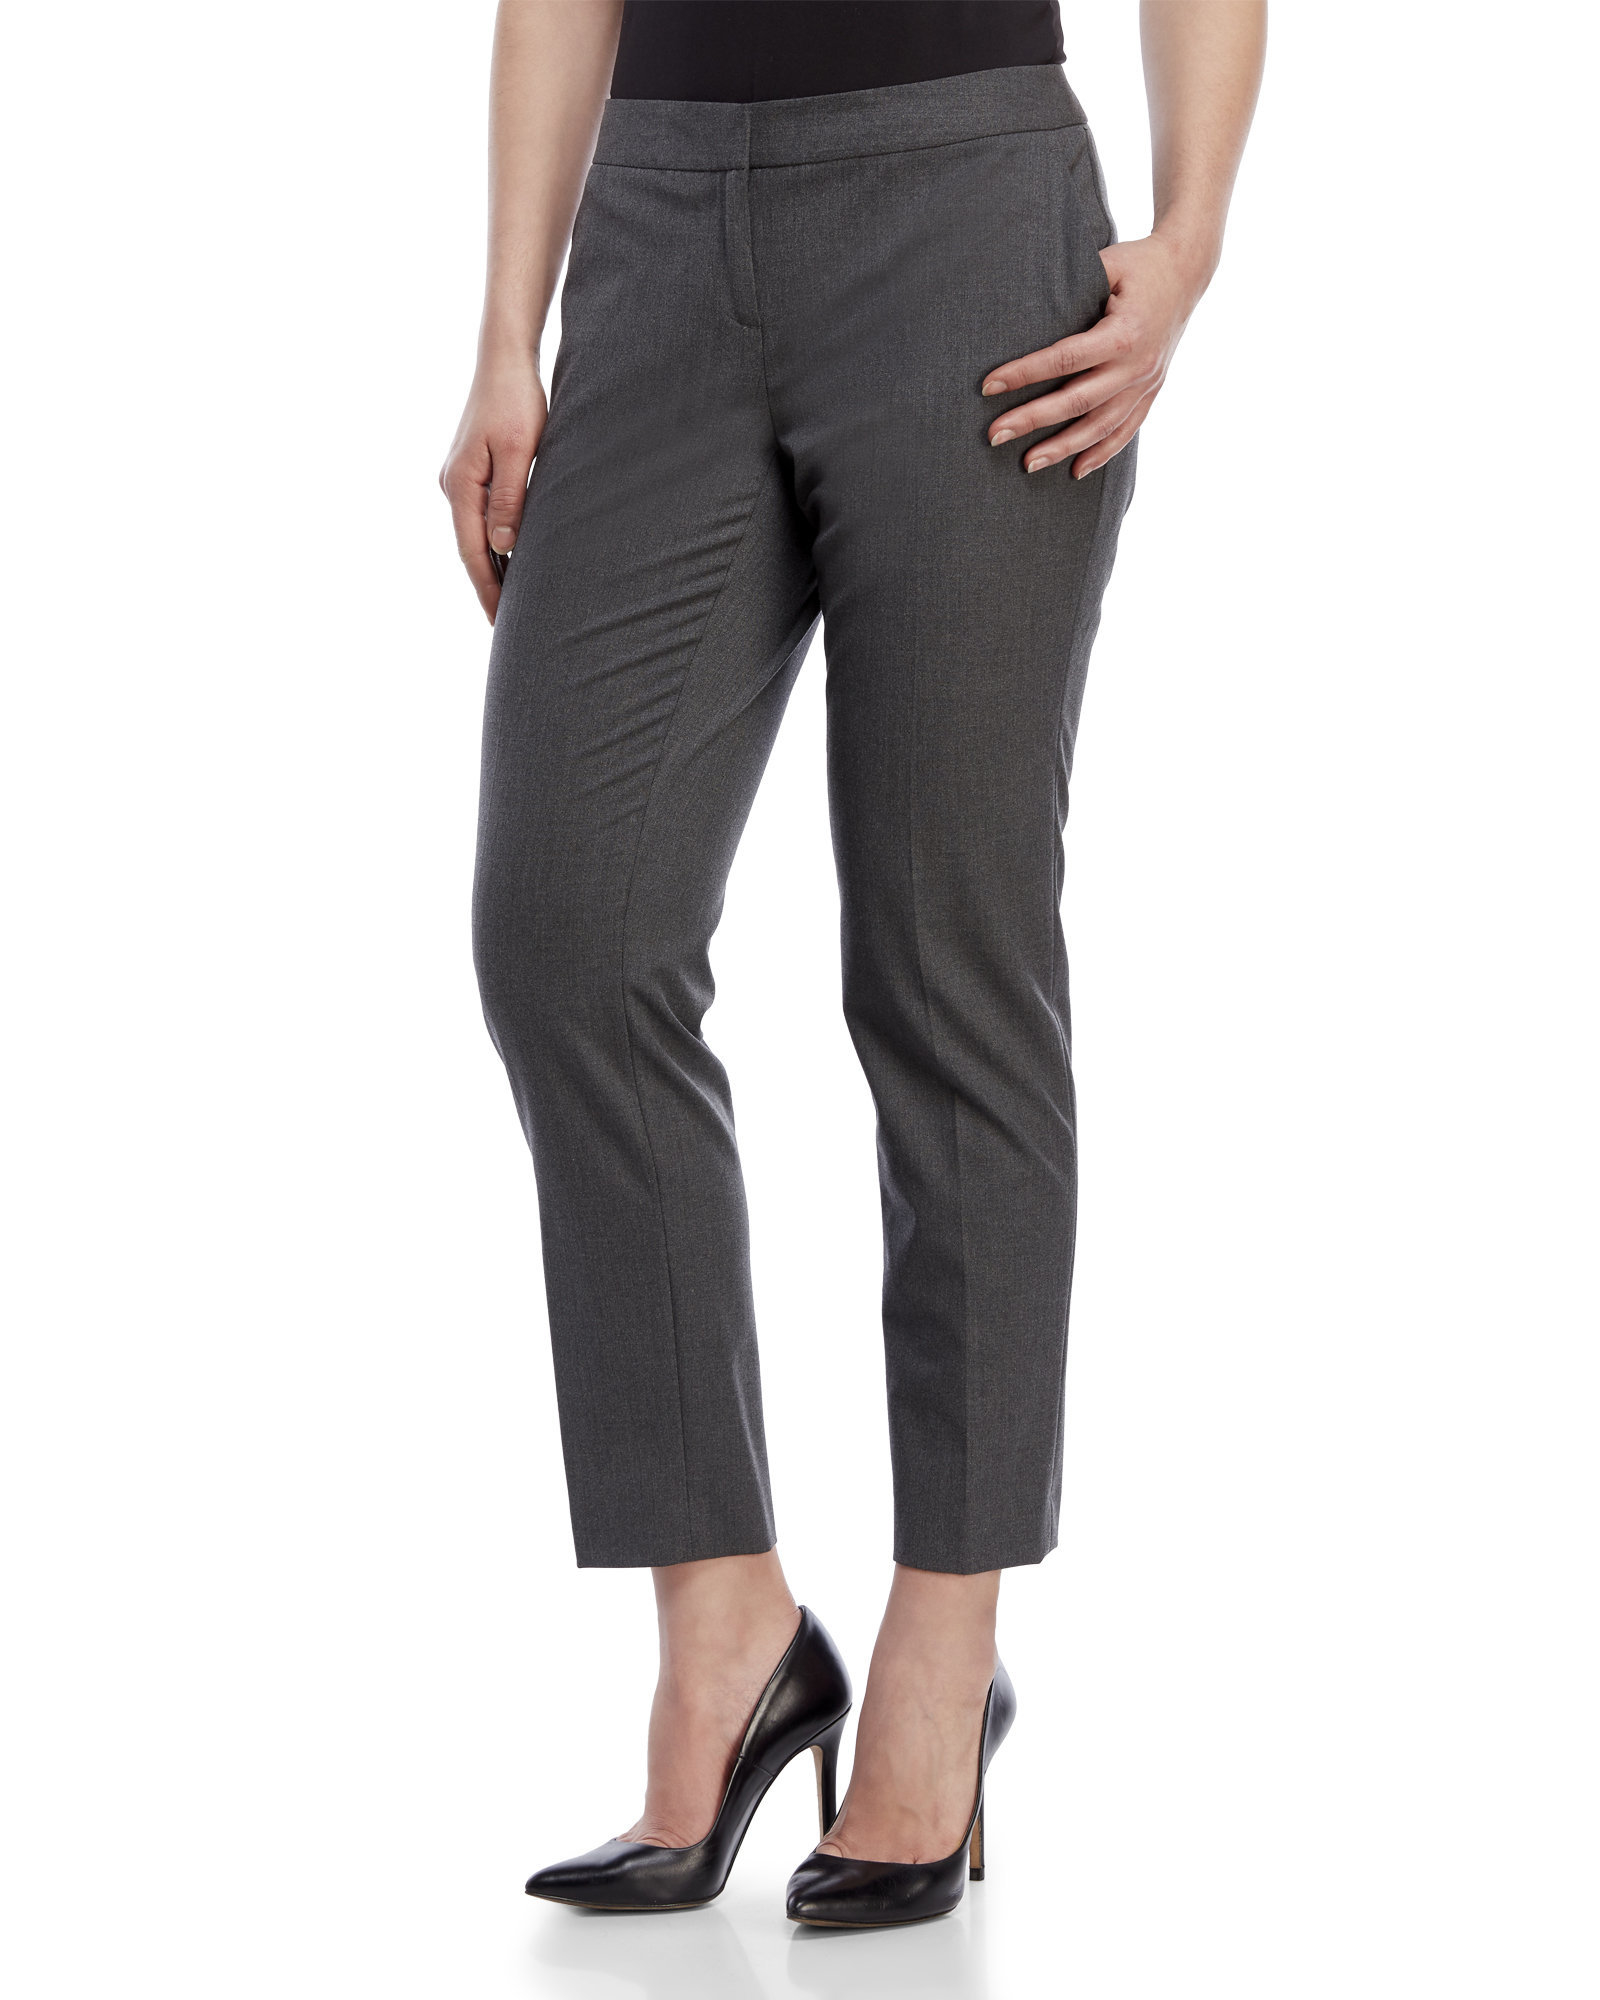 Lyst - Vince Camuto Petite Skinny Ankle Pants in Gray